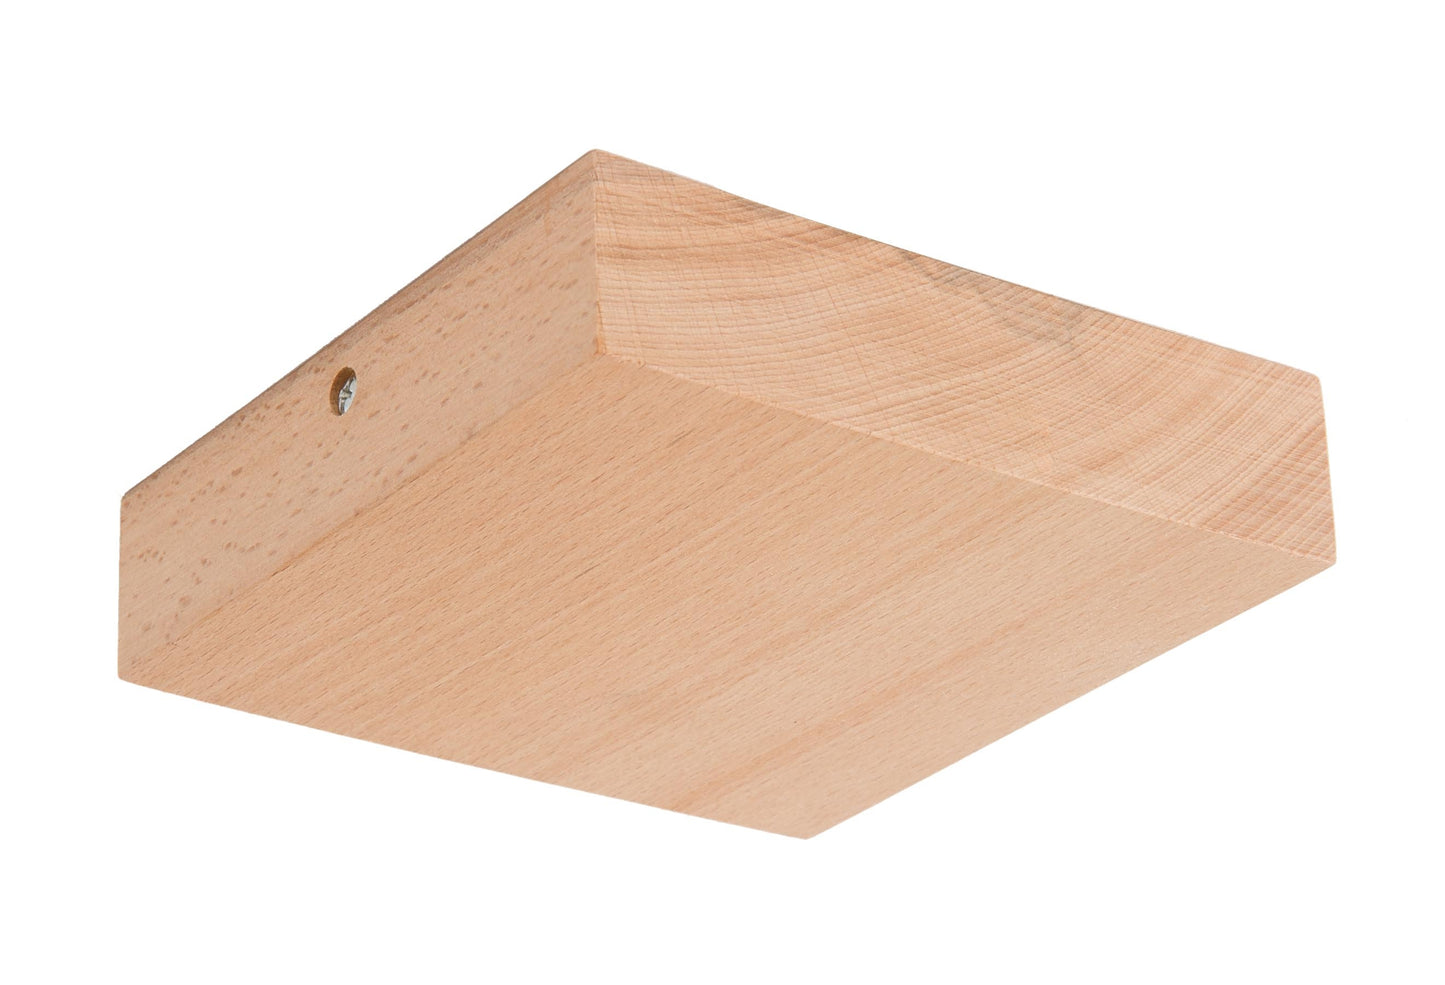 5-3/8" Wide Square Beech Wood Canopy & Hardware Kit, No Center Hole, Unfinished